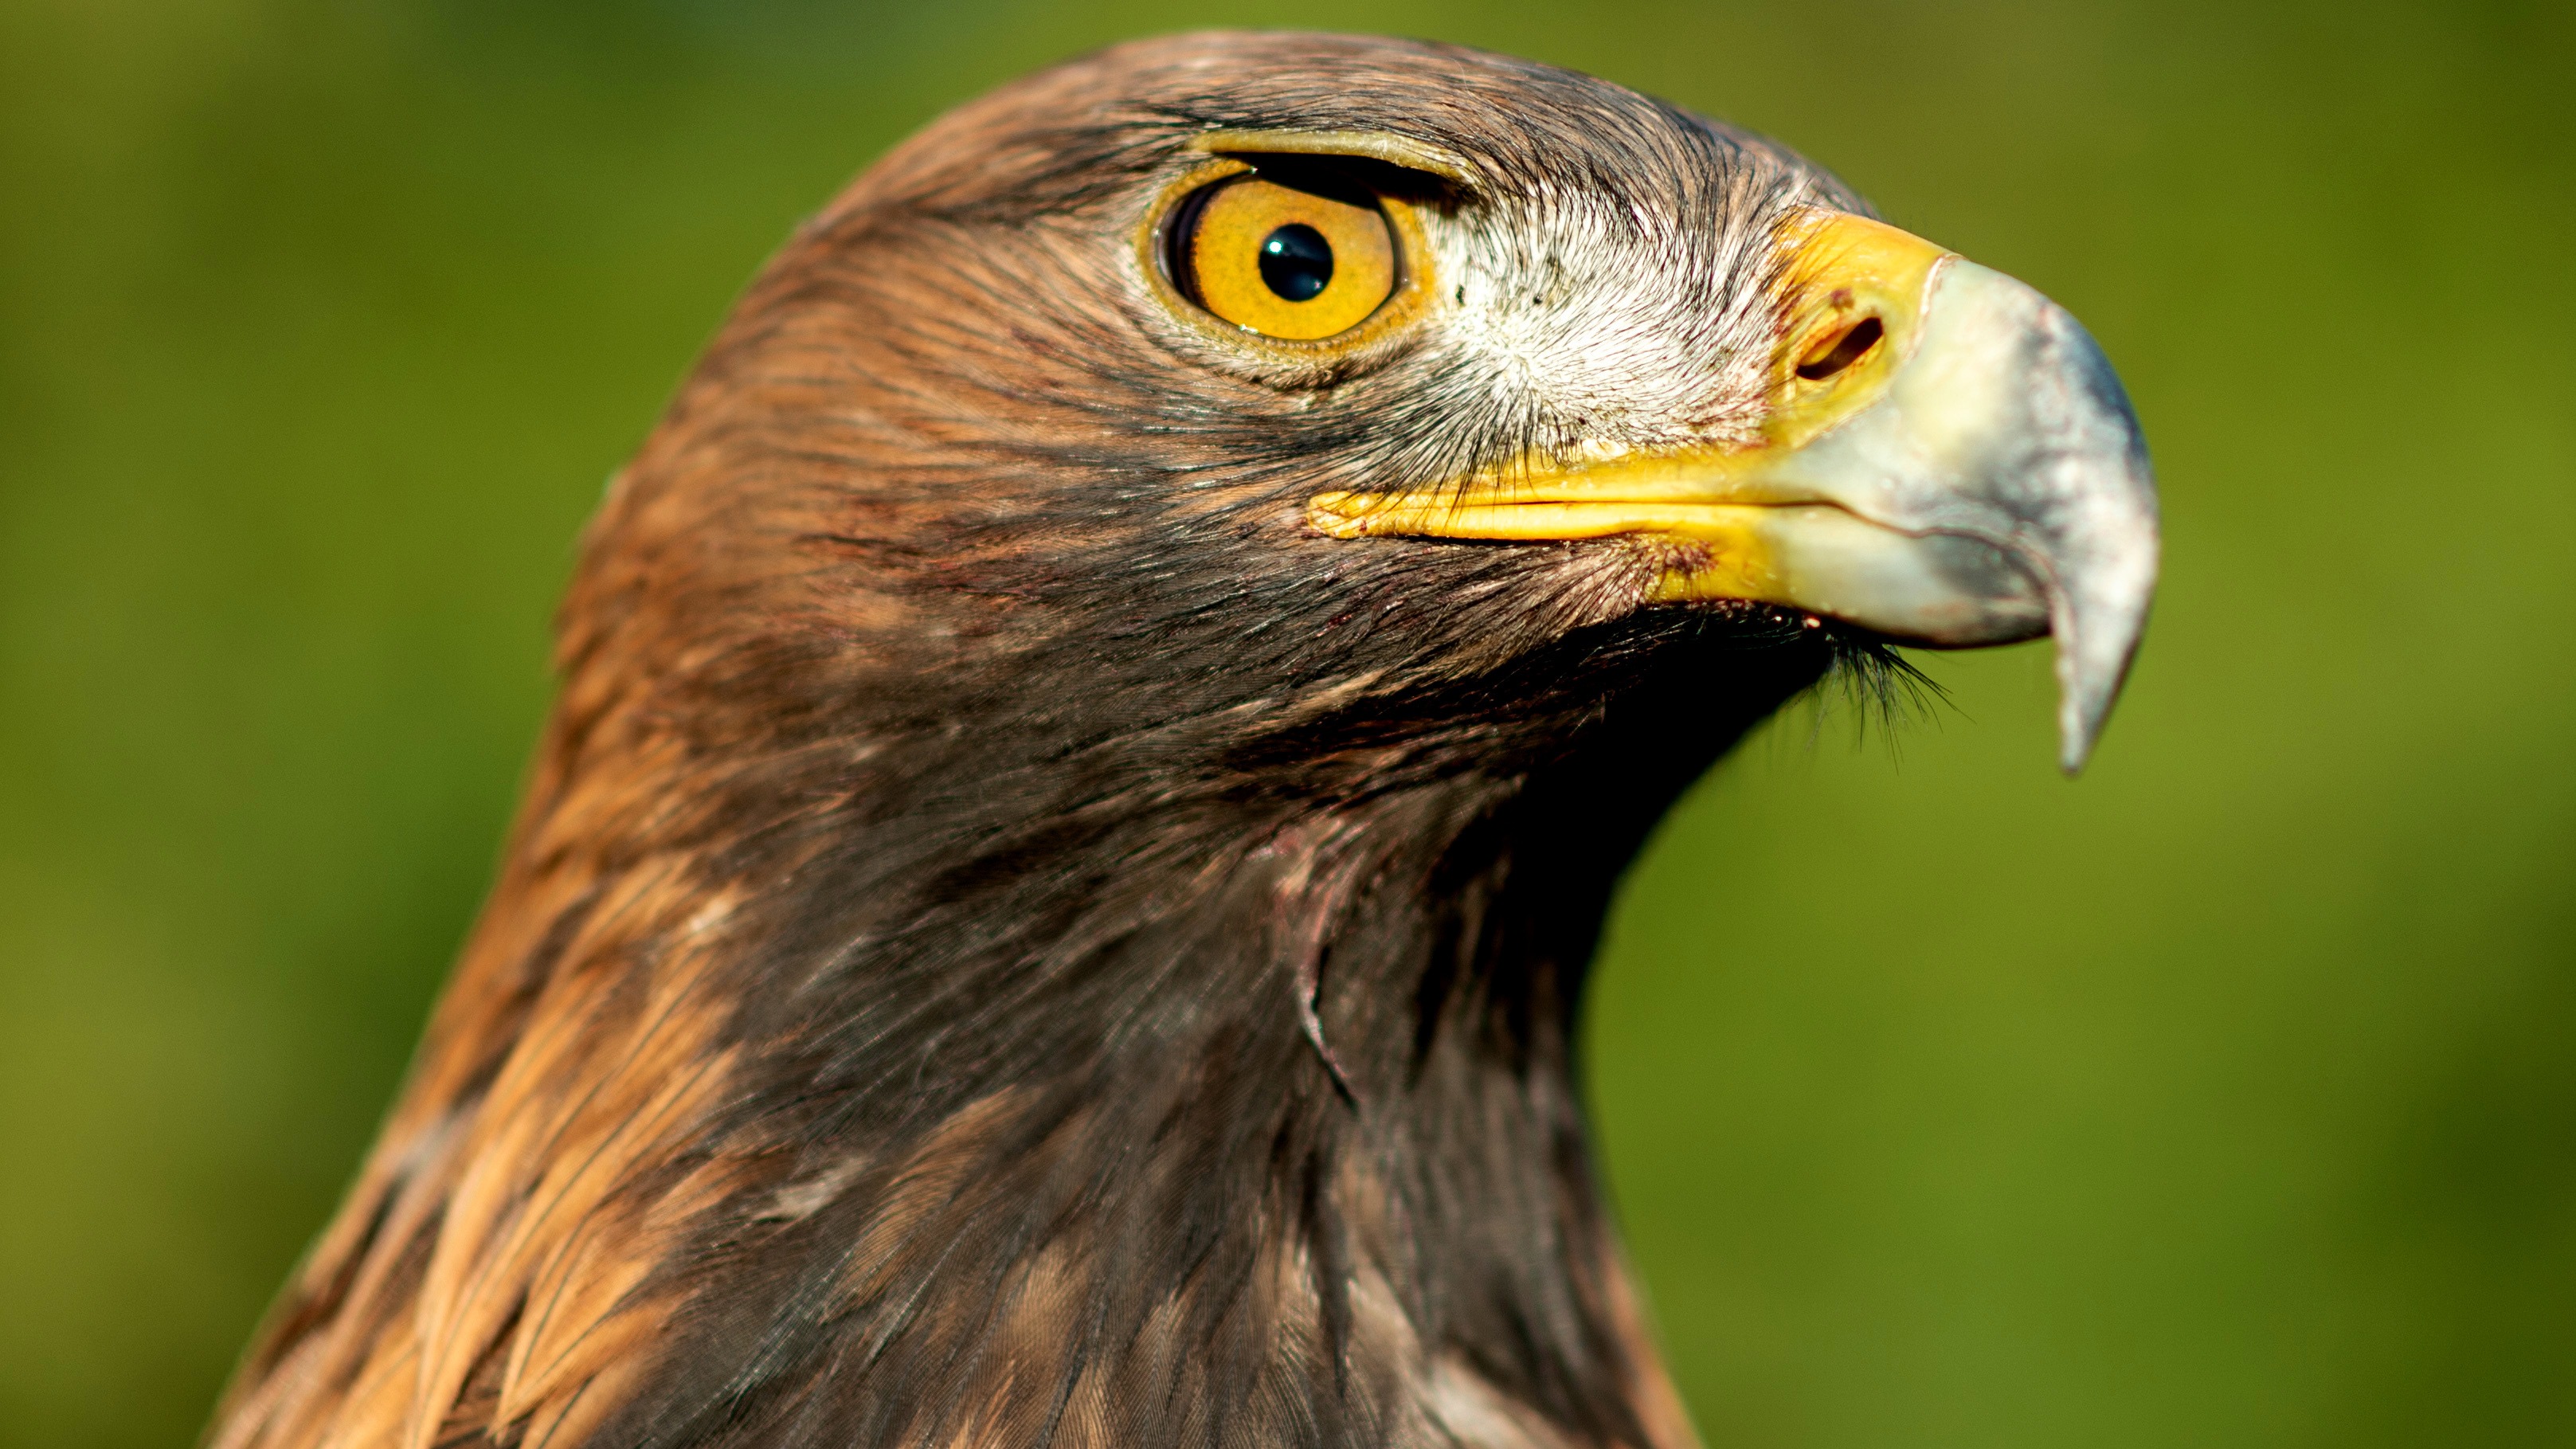 Golden eagles could return to Wales after 200 years if